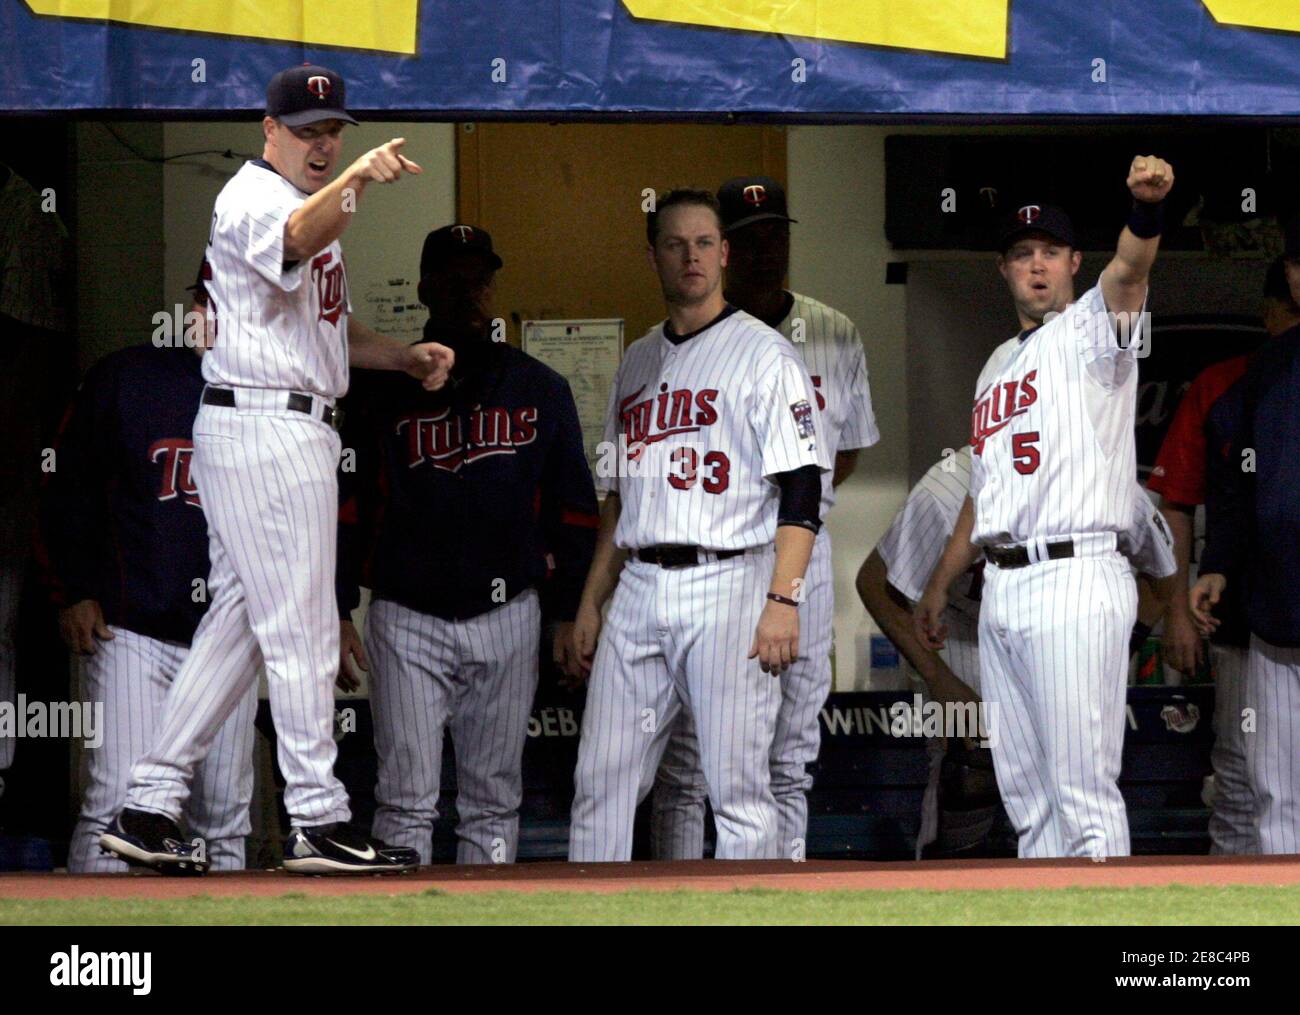 Minnesota Twins Mike Redmond (L), Justin Morneau (33) and Michael Cuddyer (5) cheer for teammate Nick Punto after Punto's squeeze bunt scores Twins Delmon Young from third base during the fourth inning of the Twins' American League baseball game against the Chicago White Sox at the Metrodome in Minneapolis September 23, 2008.    REUTERS/Eric Miller (UNITED STATES) Stock Photo